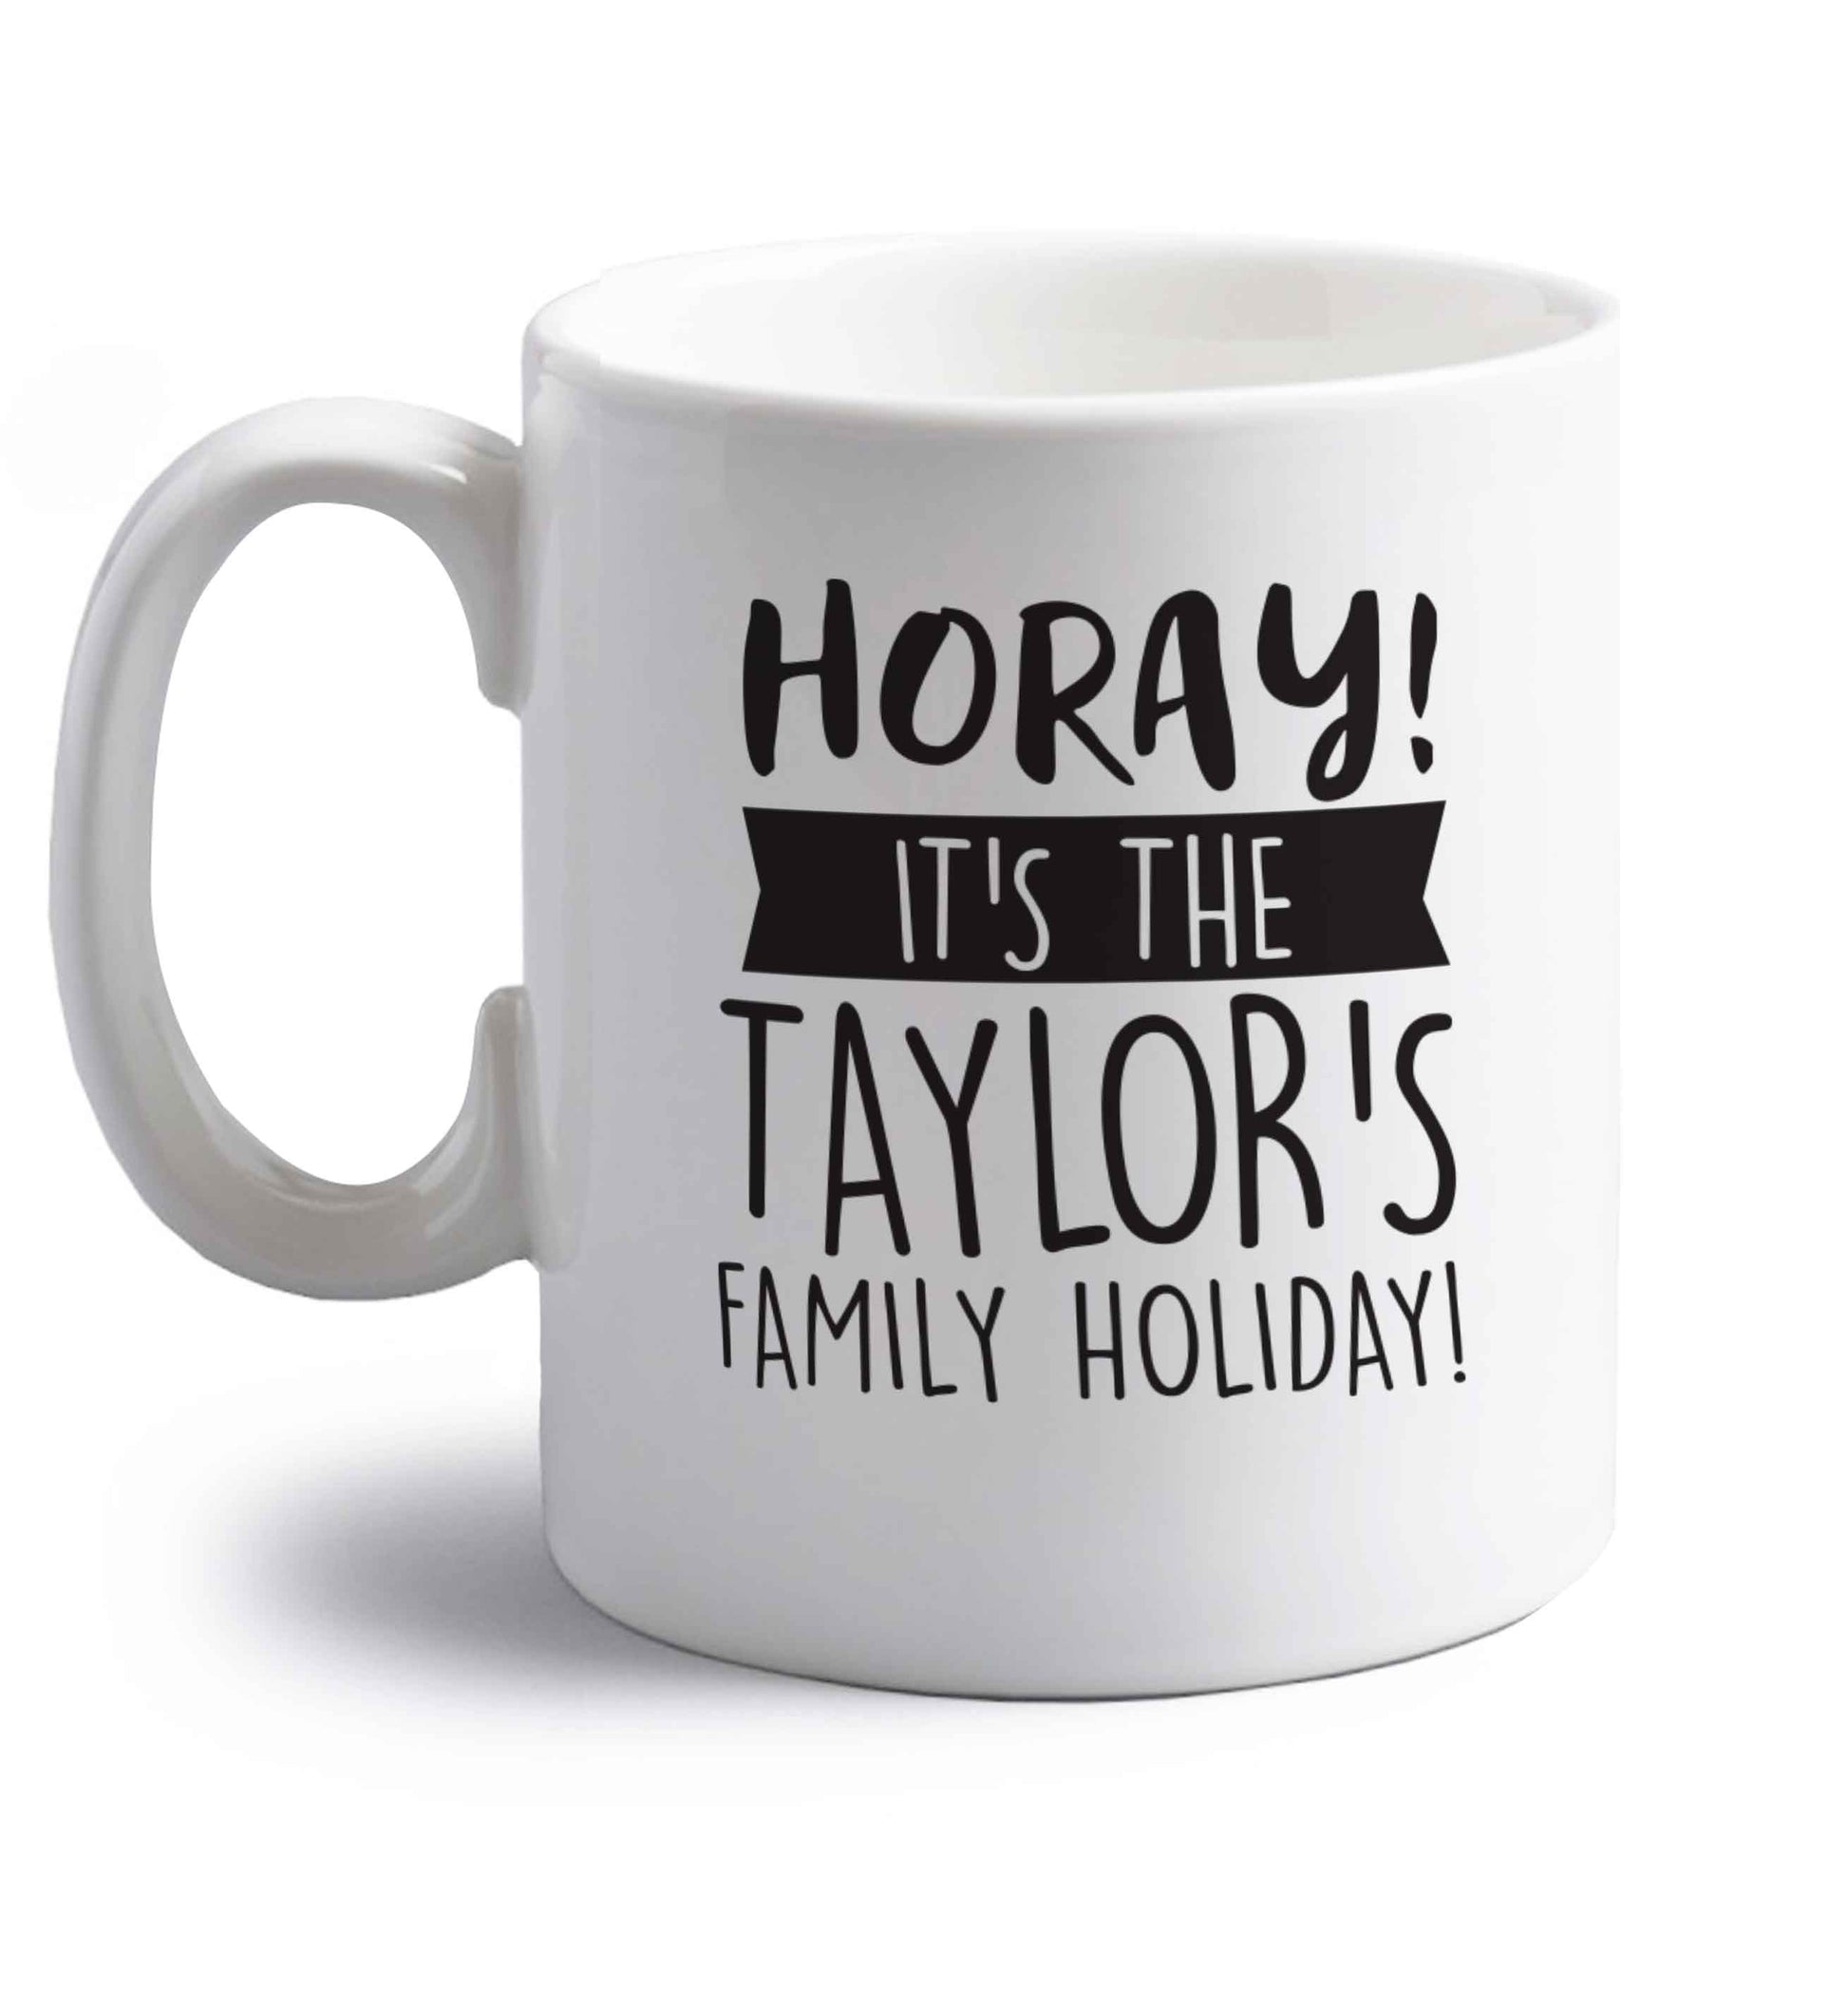 Horay it's the Taylor's family holiday! personalised item right handed white ceramic mug 